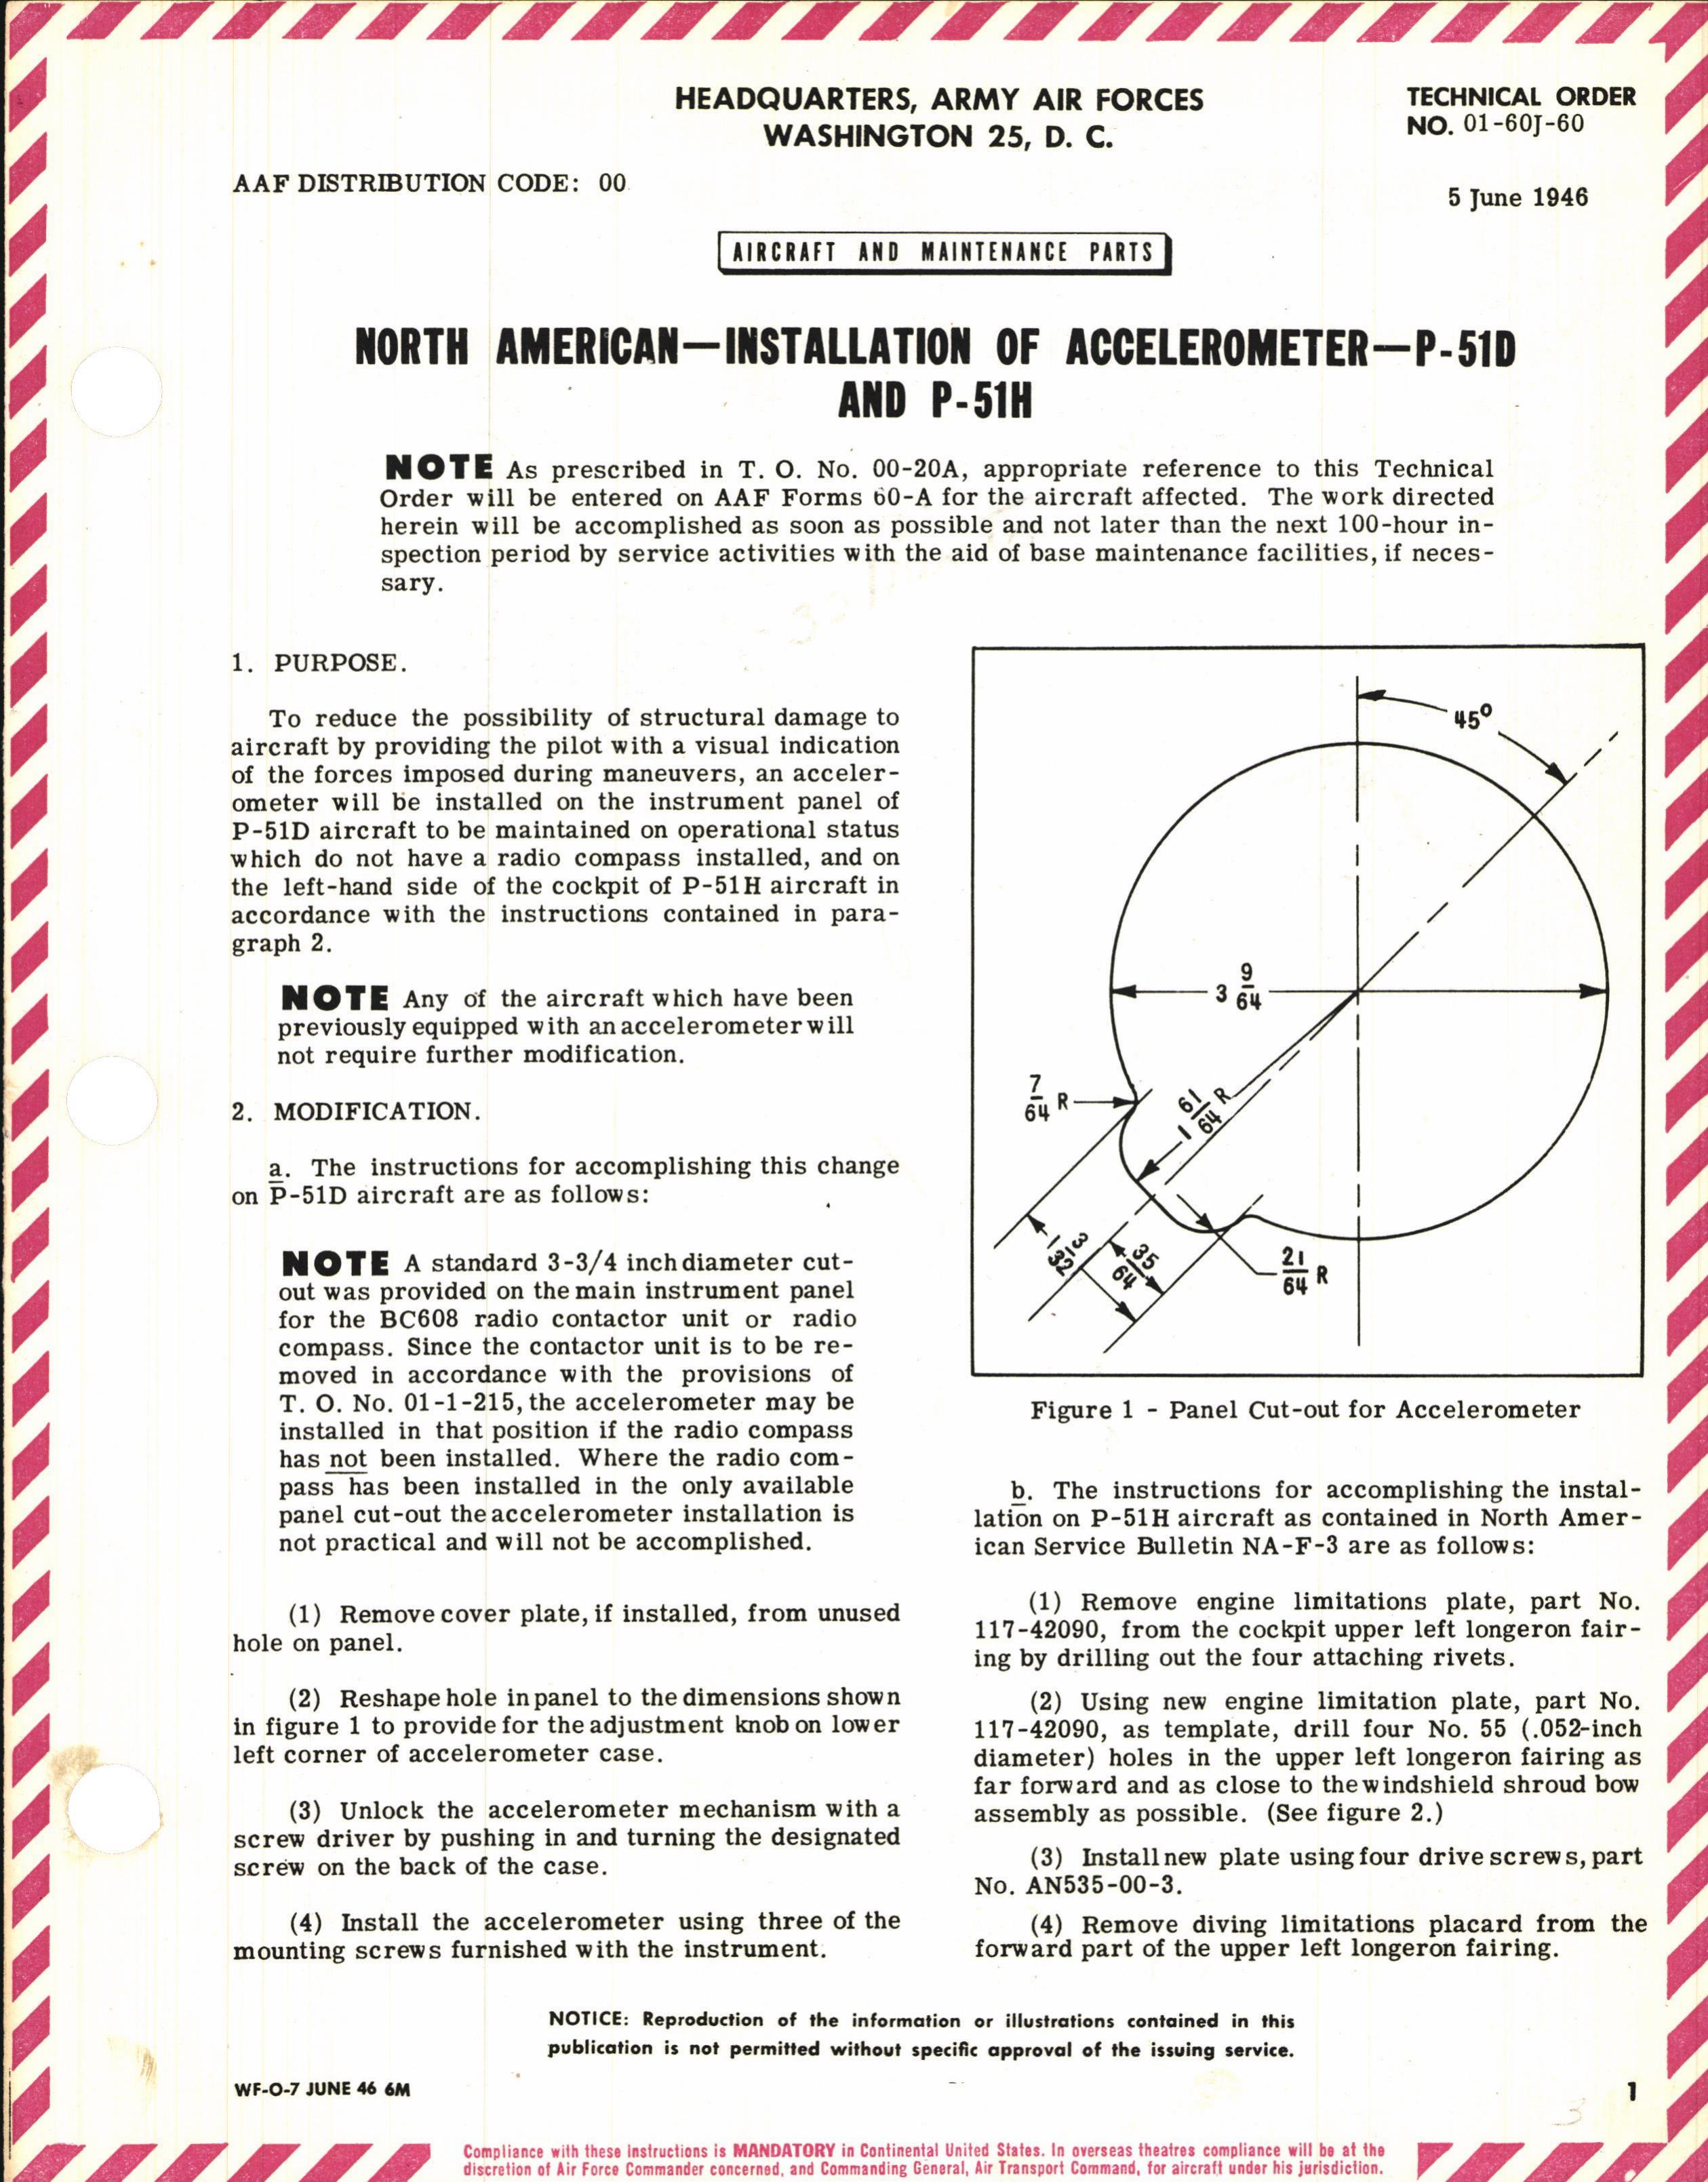 Sample page 1 from AirCorps Library document: Installation of Accelerometer for P-51D and P-51H